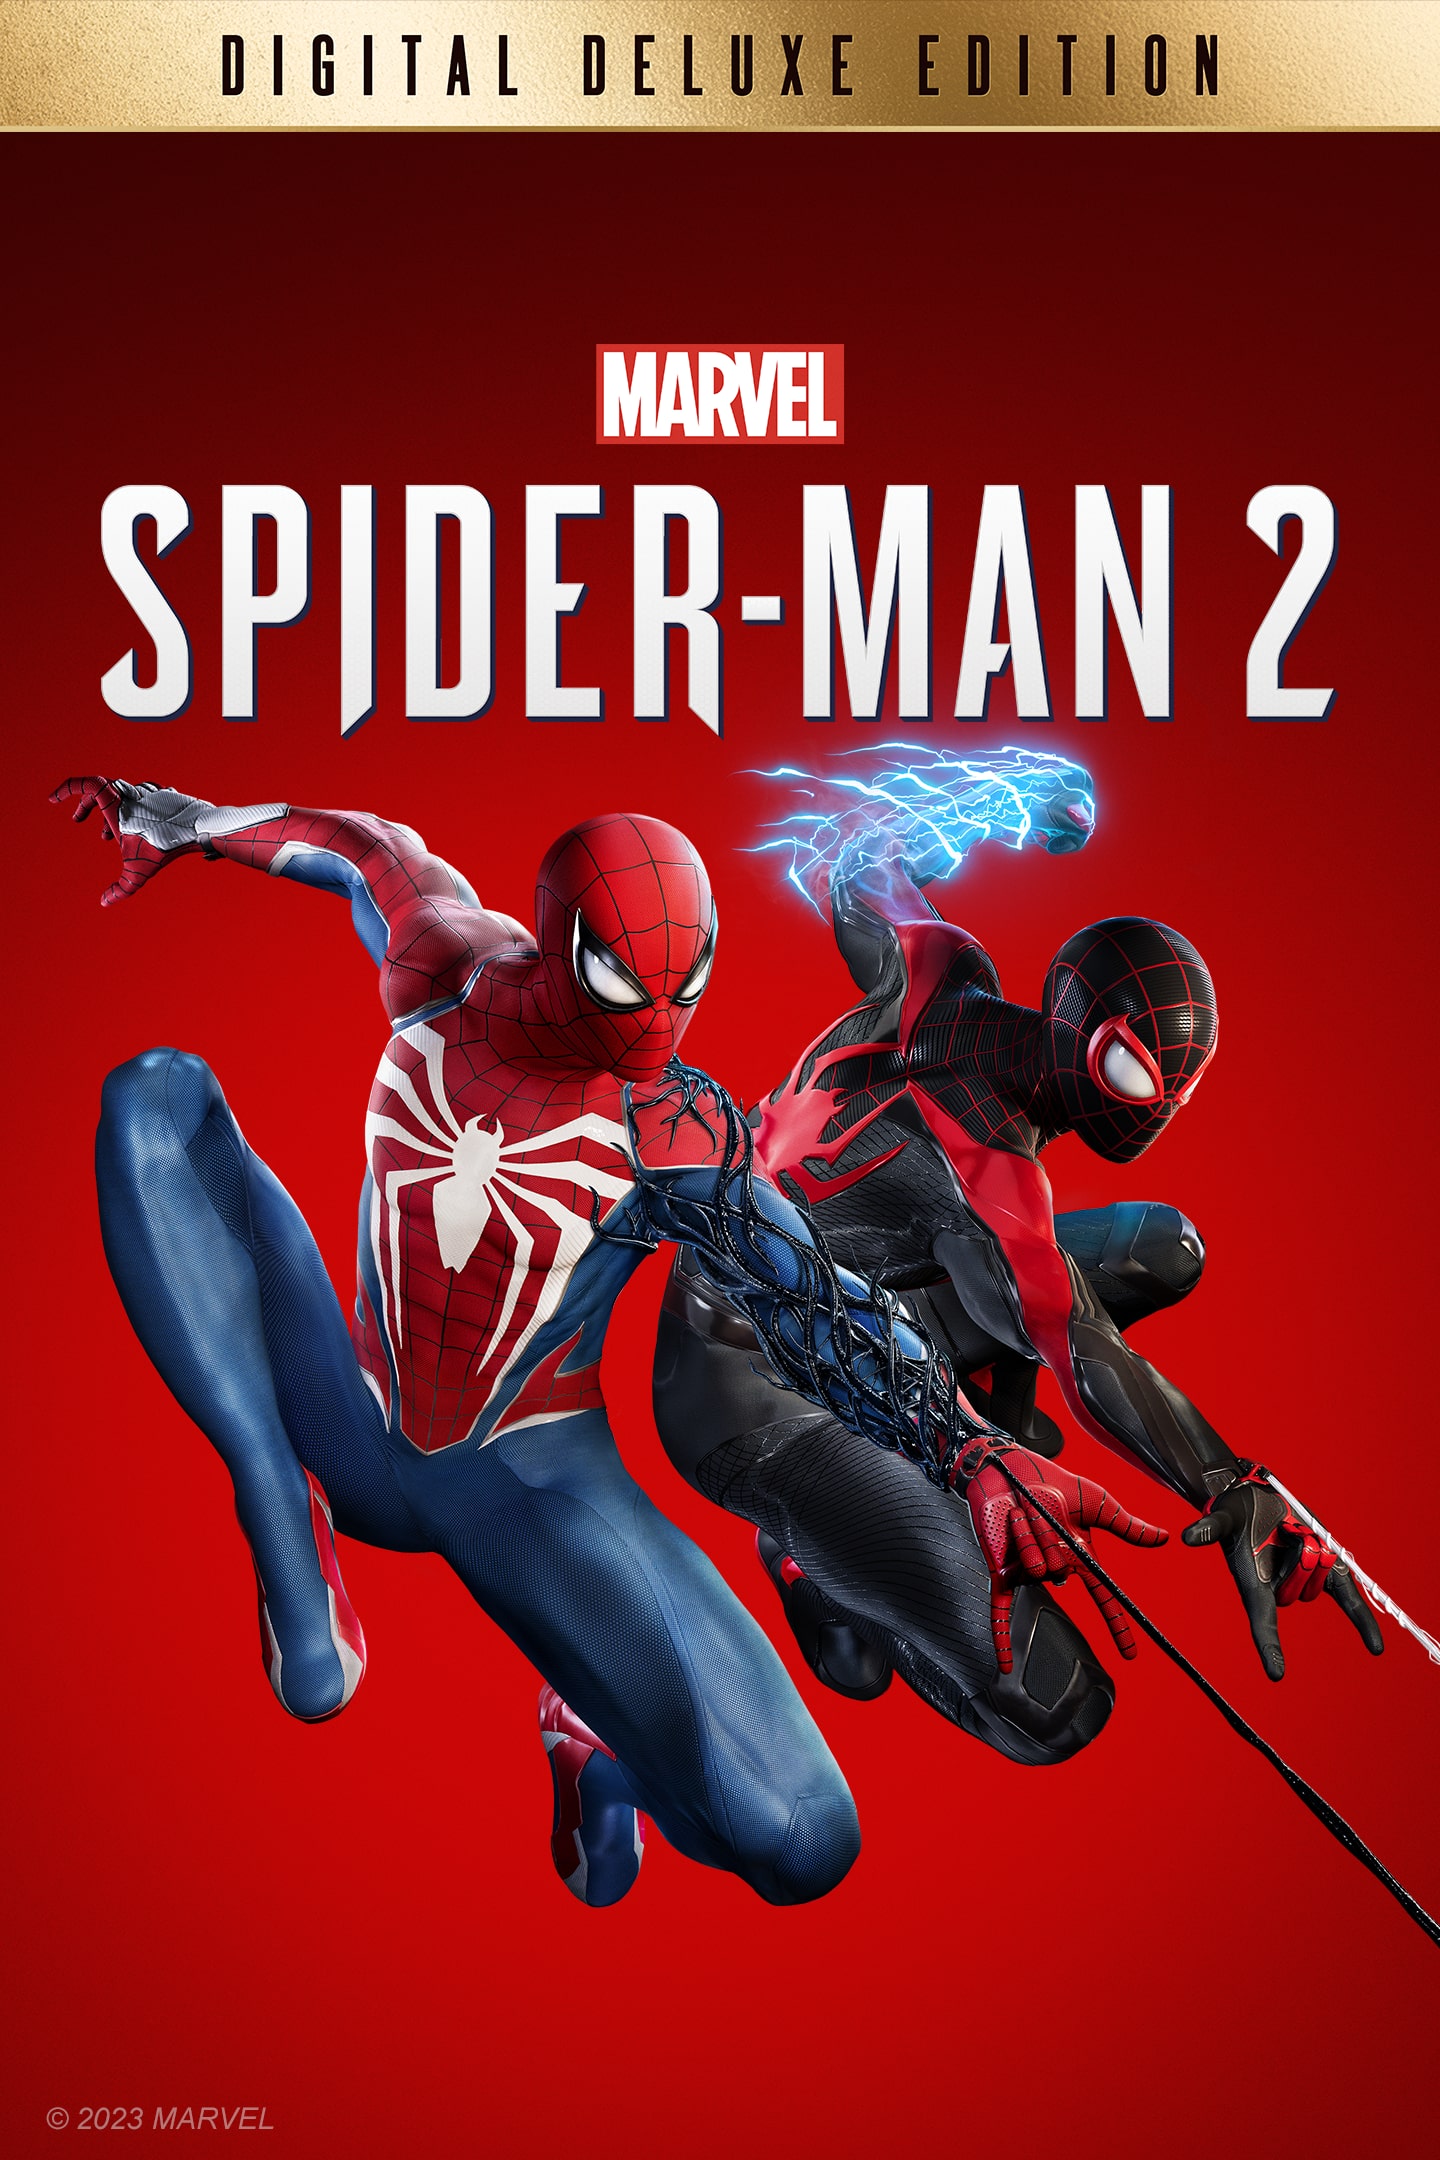 Marvel's 2 PS5 Exclusive | PlayStation (US)